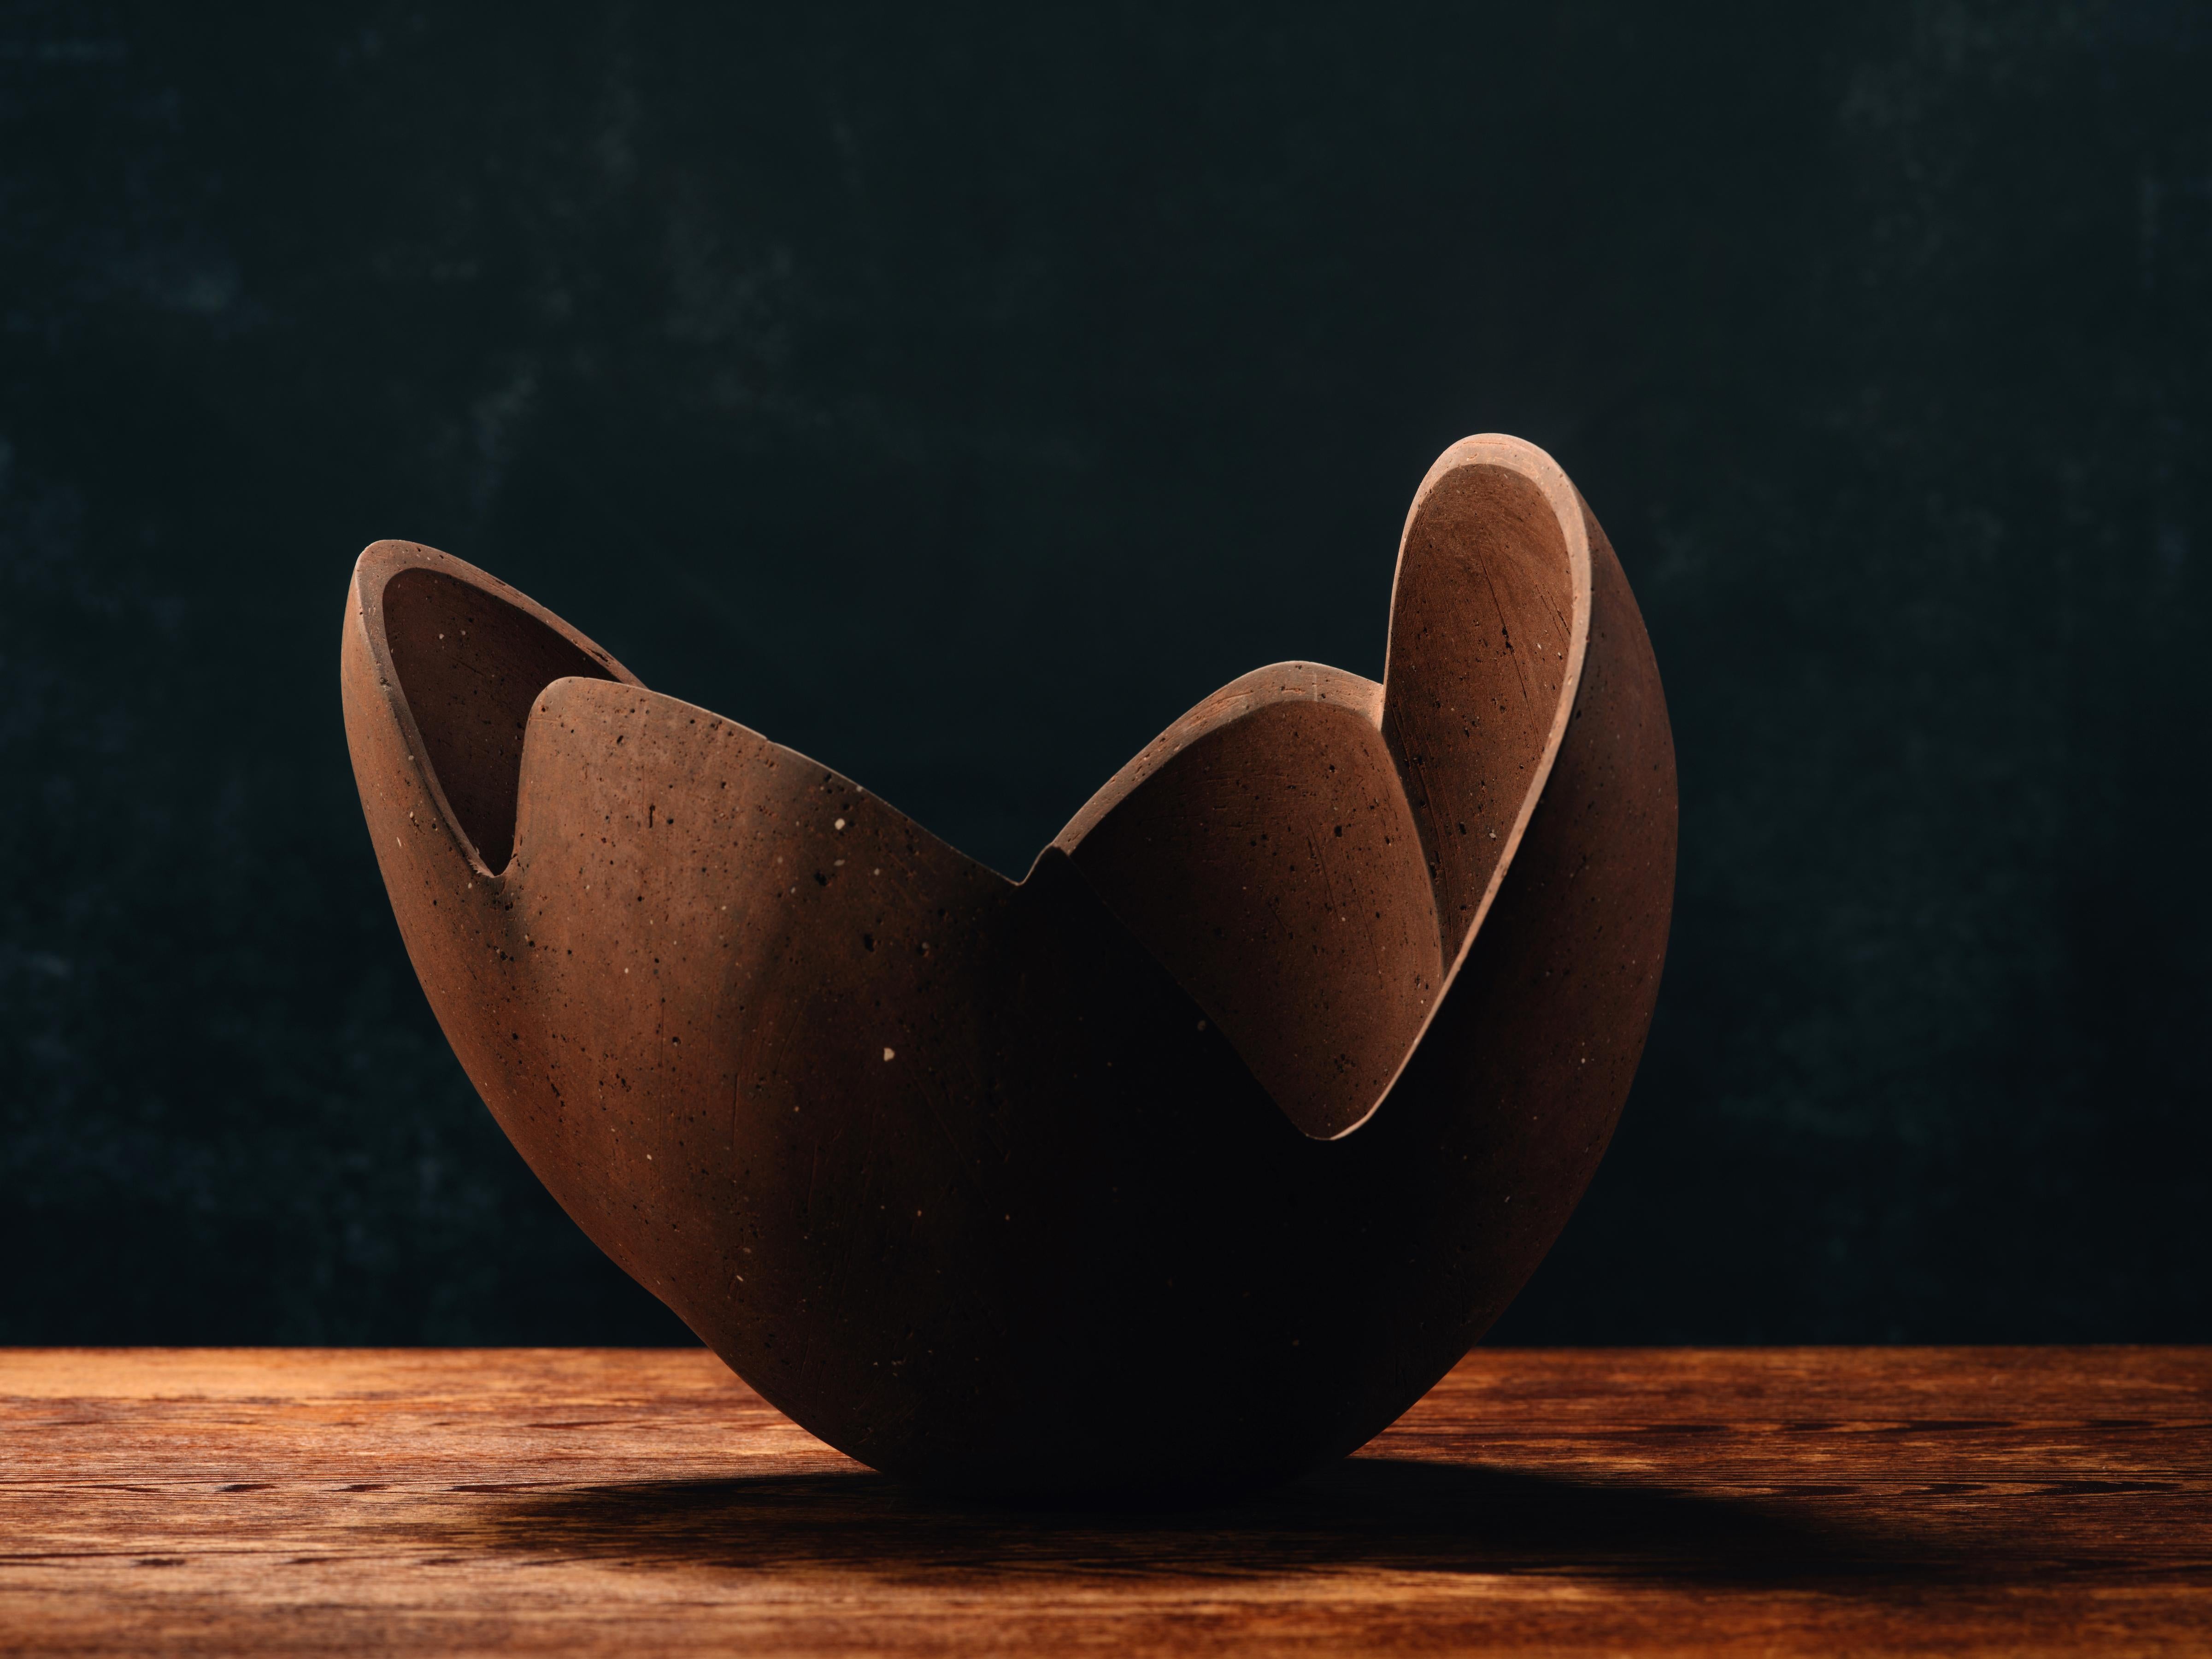 Title: Perianth 06
Year: 2021

Freeform ceramic sculpture made from a blend of high-iron stoneware clays hand-collected by the artist in Minnesota. Its surface is hand-polished with diamond sandpaper to render a matte finish. Signed with the